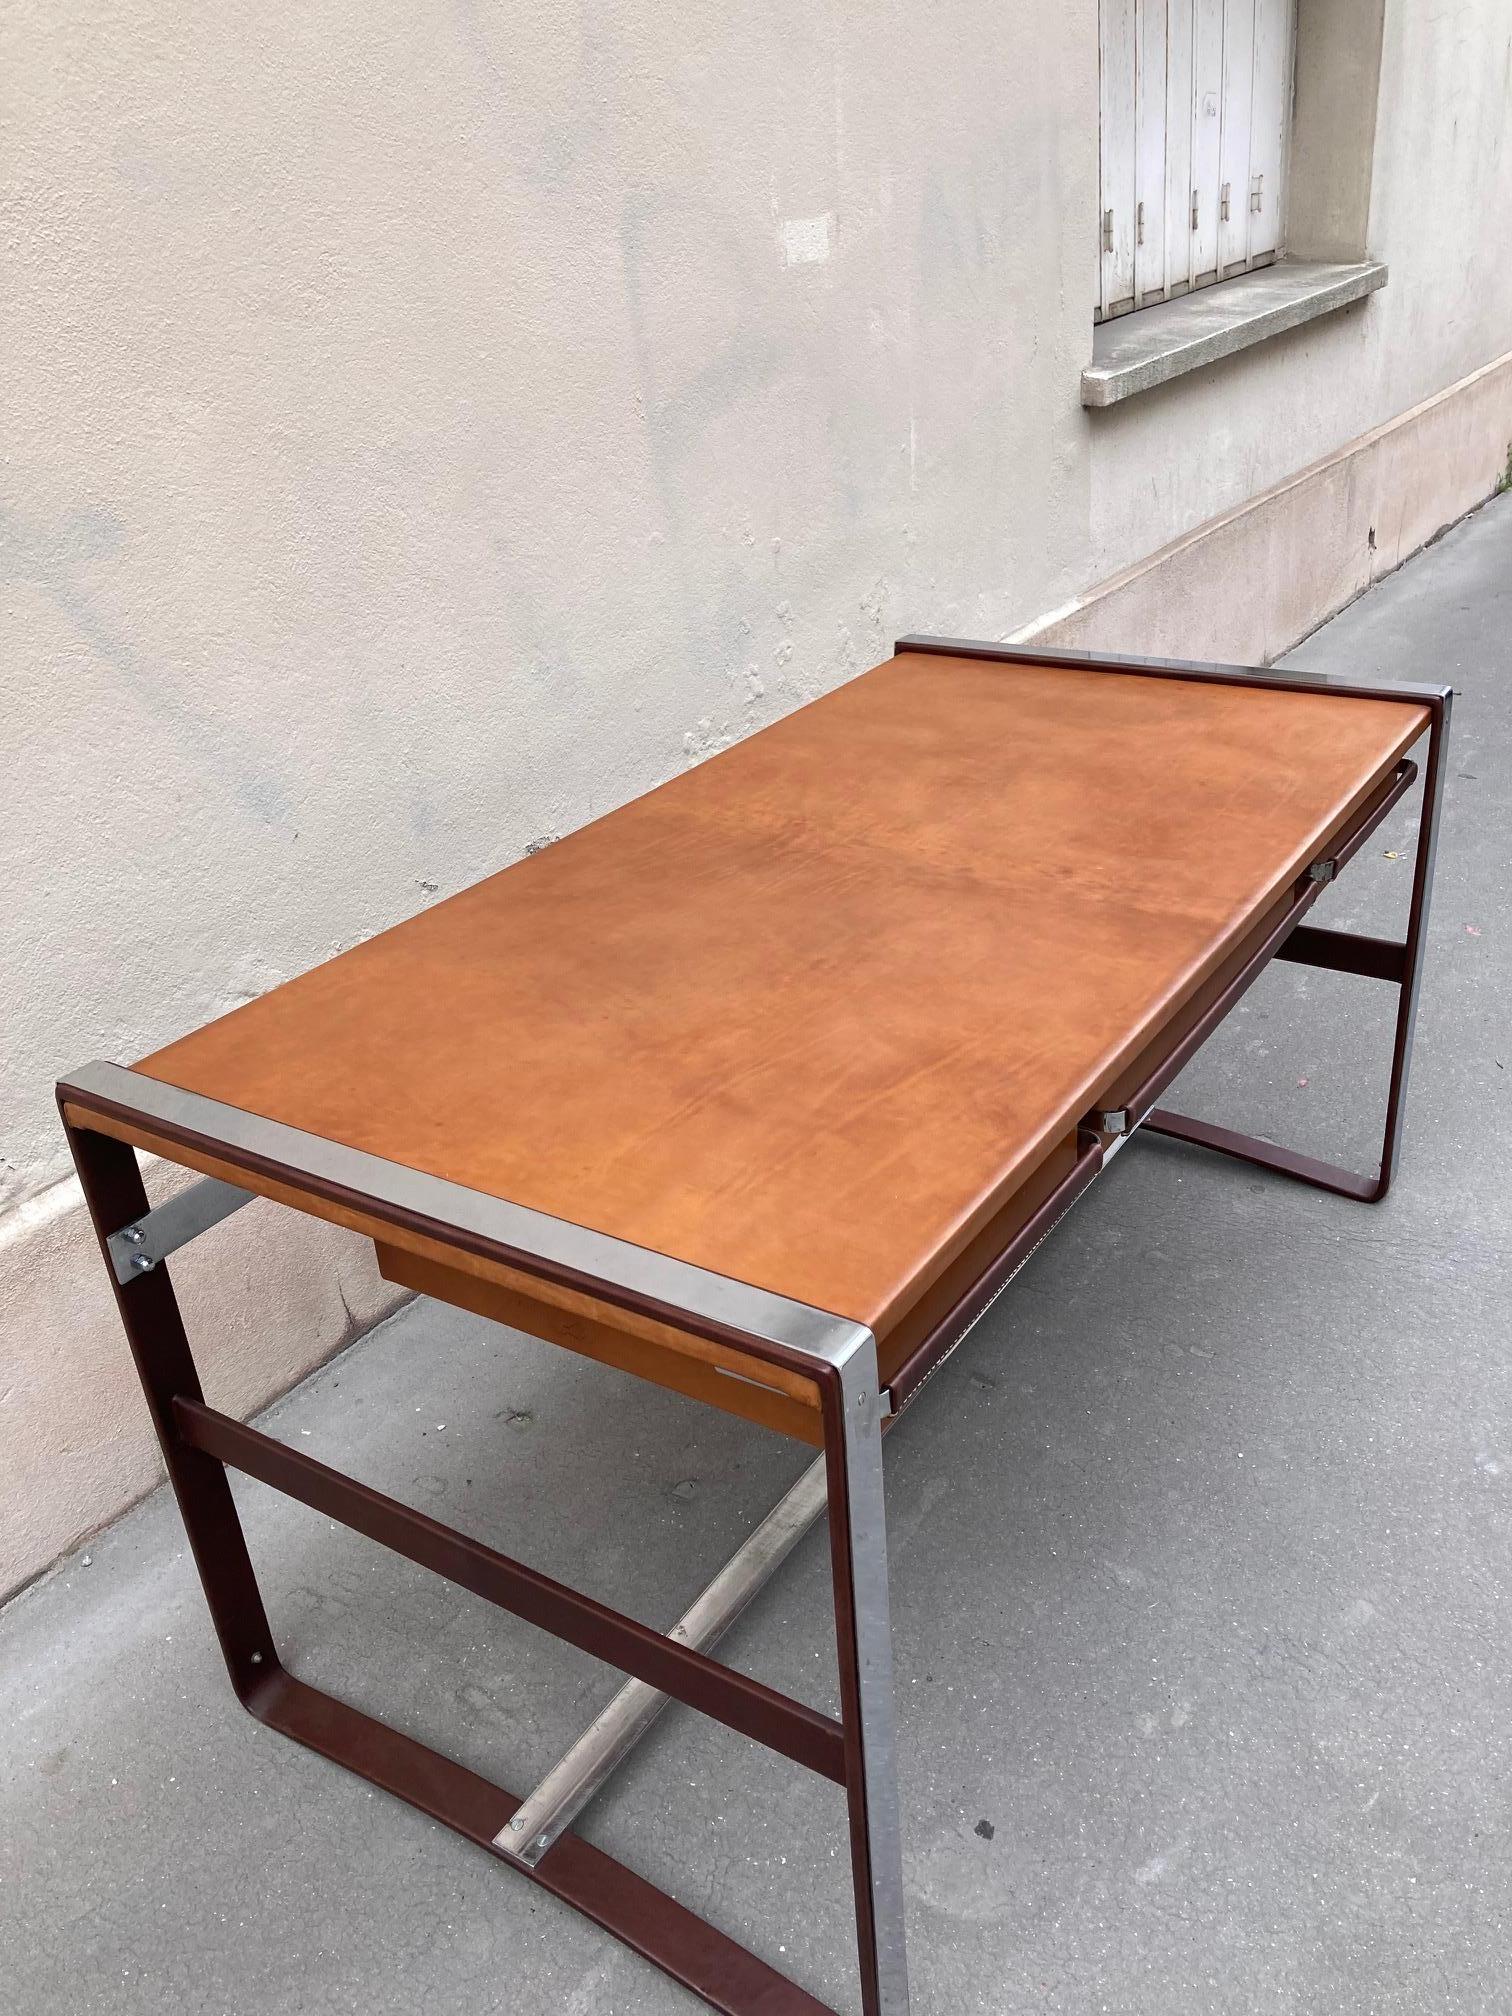 1950's Stitched Leather Desk by Jacques Adnet For Sale 7